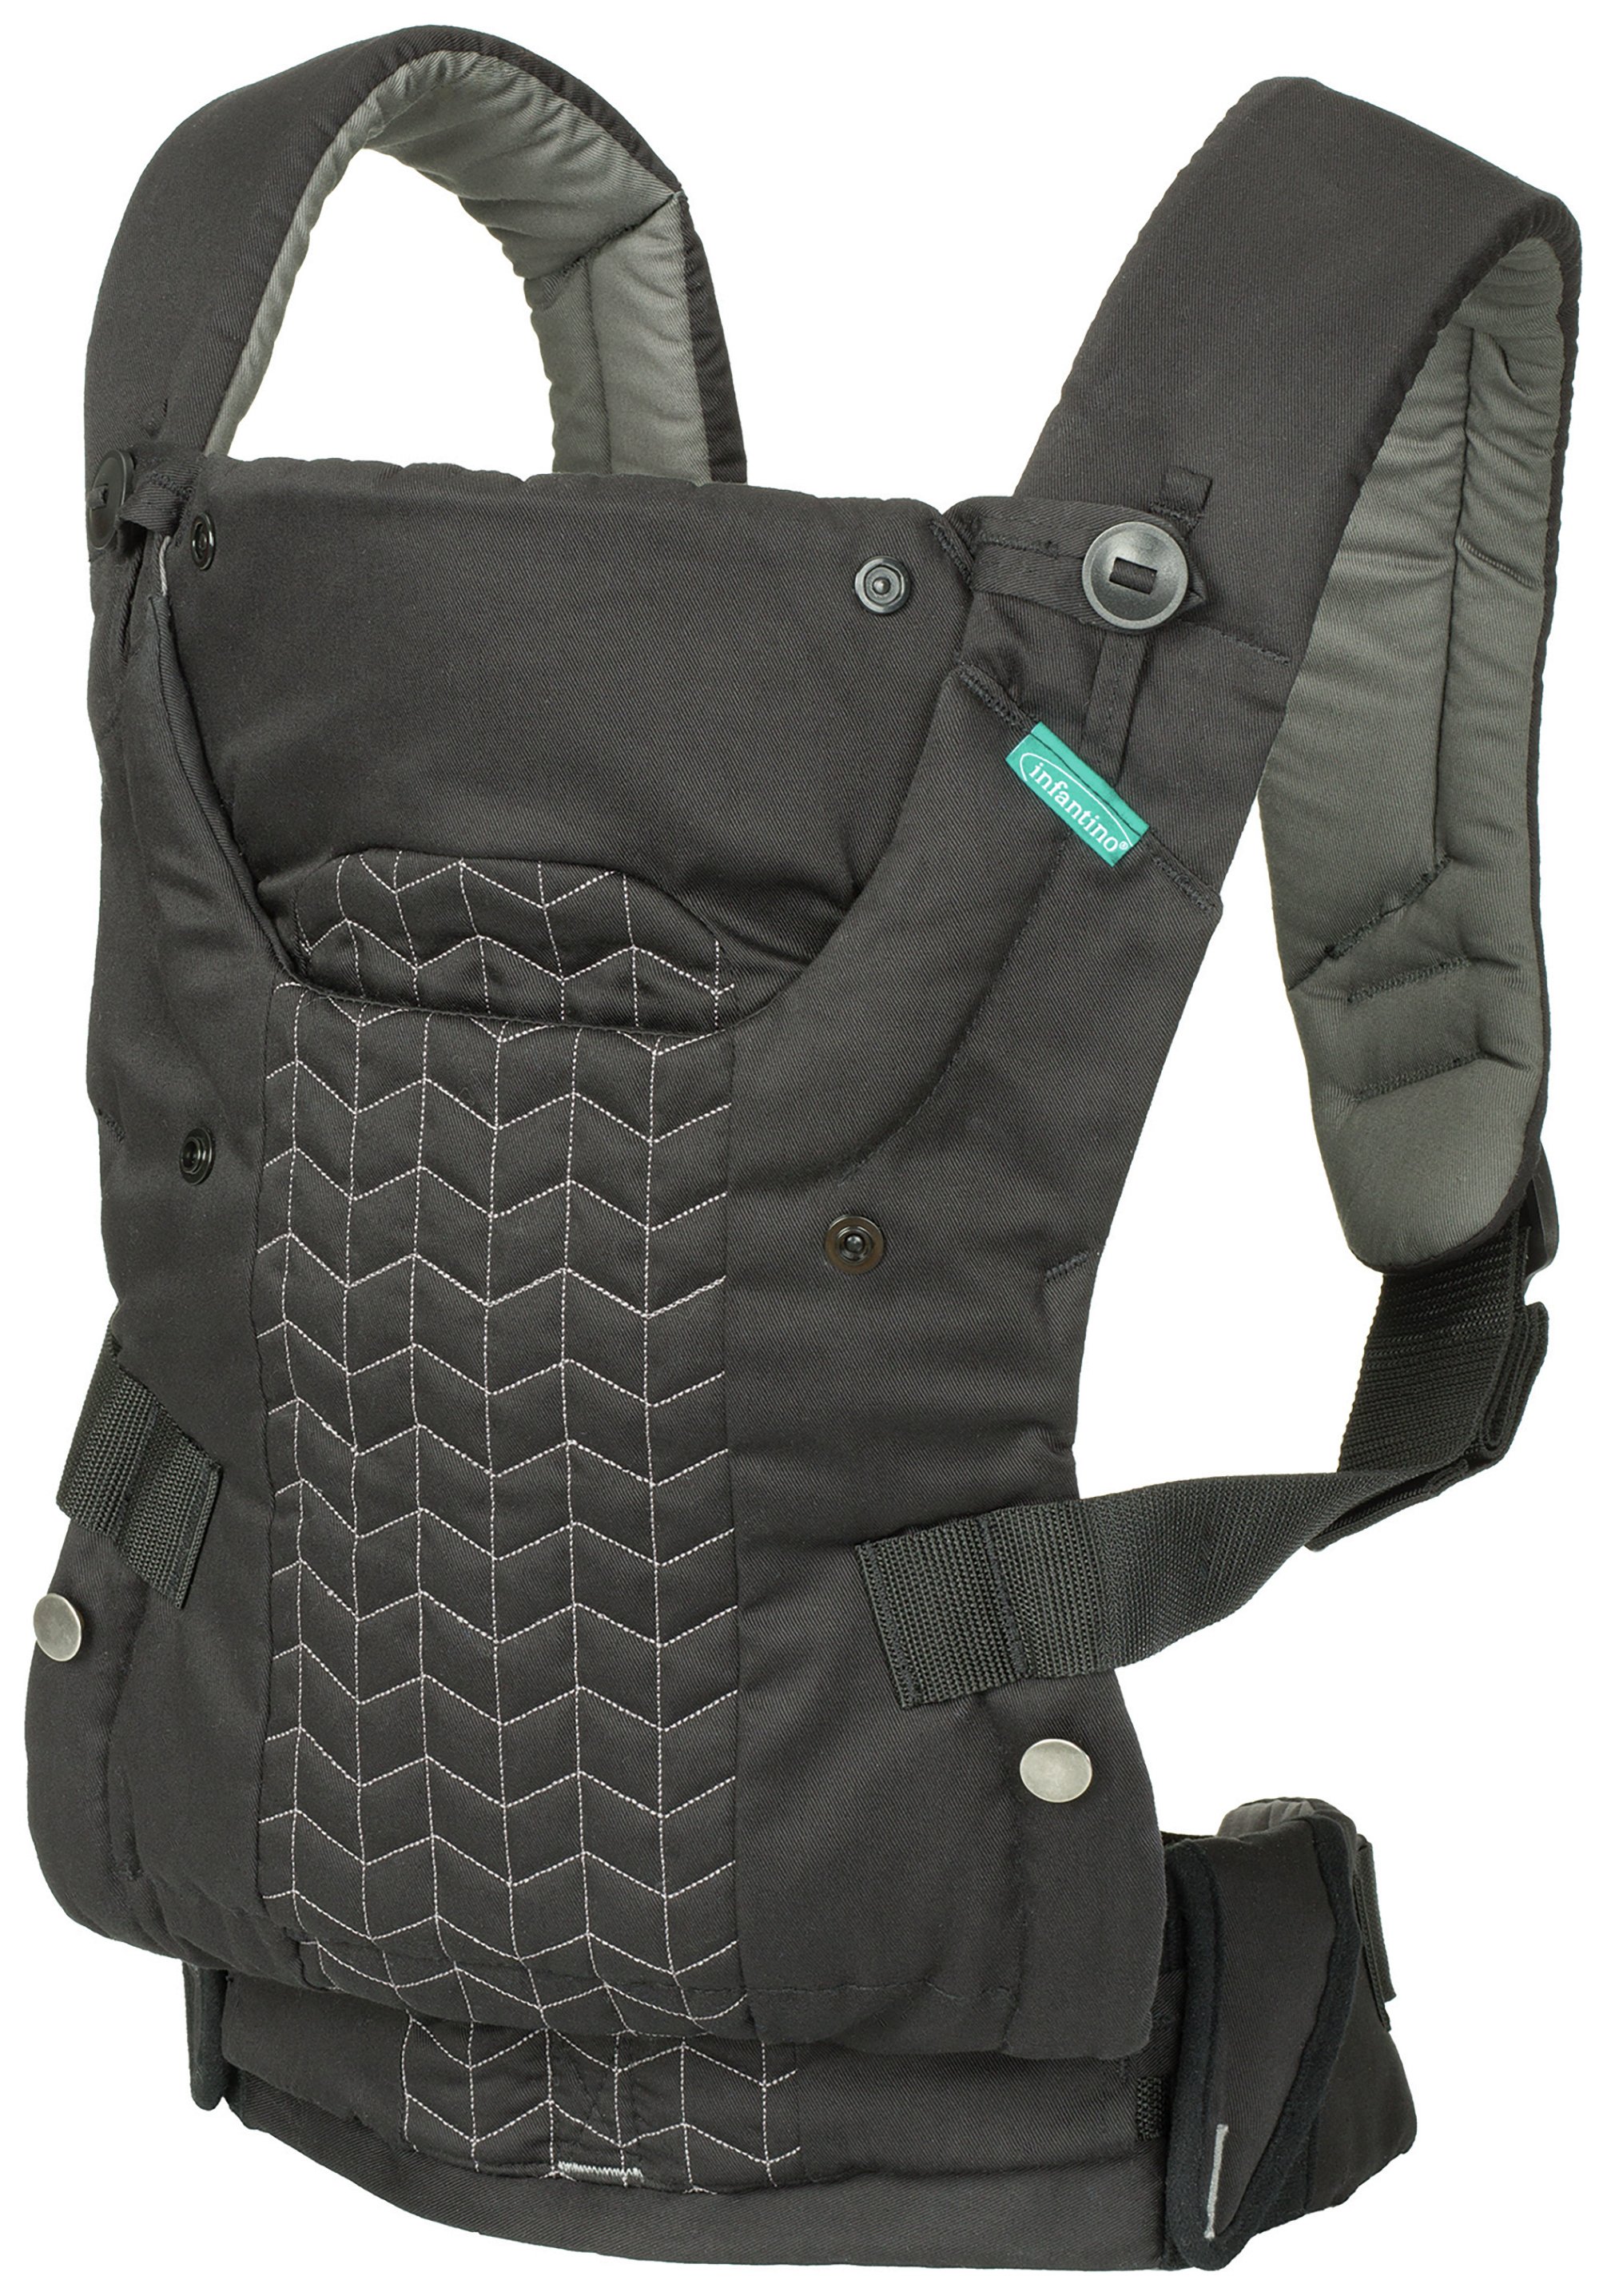 baby carrier backpack argos